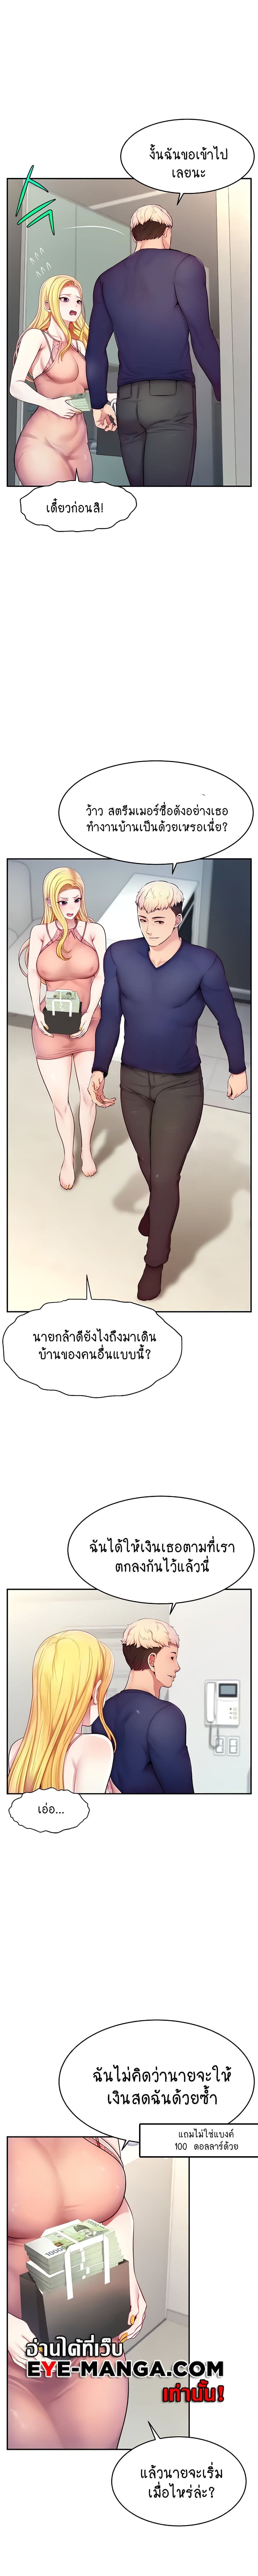 Making Friends With Streamers by Hacking! ตอนที่ 4 ภาพ 14